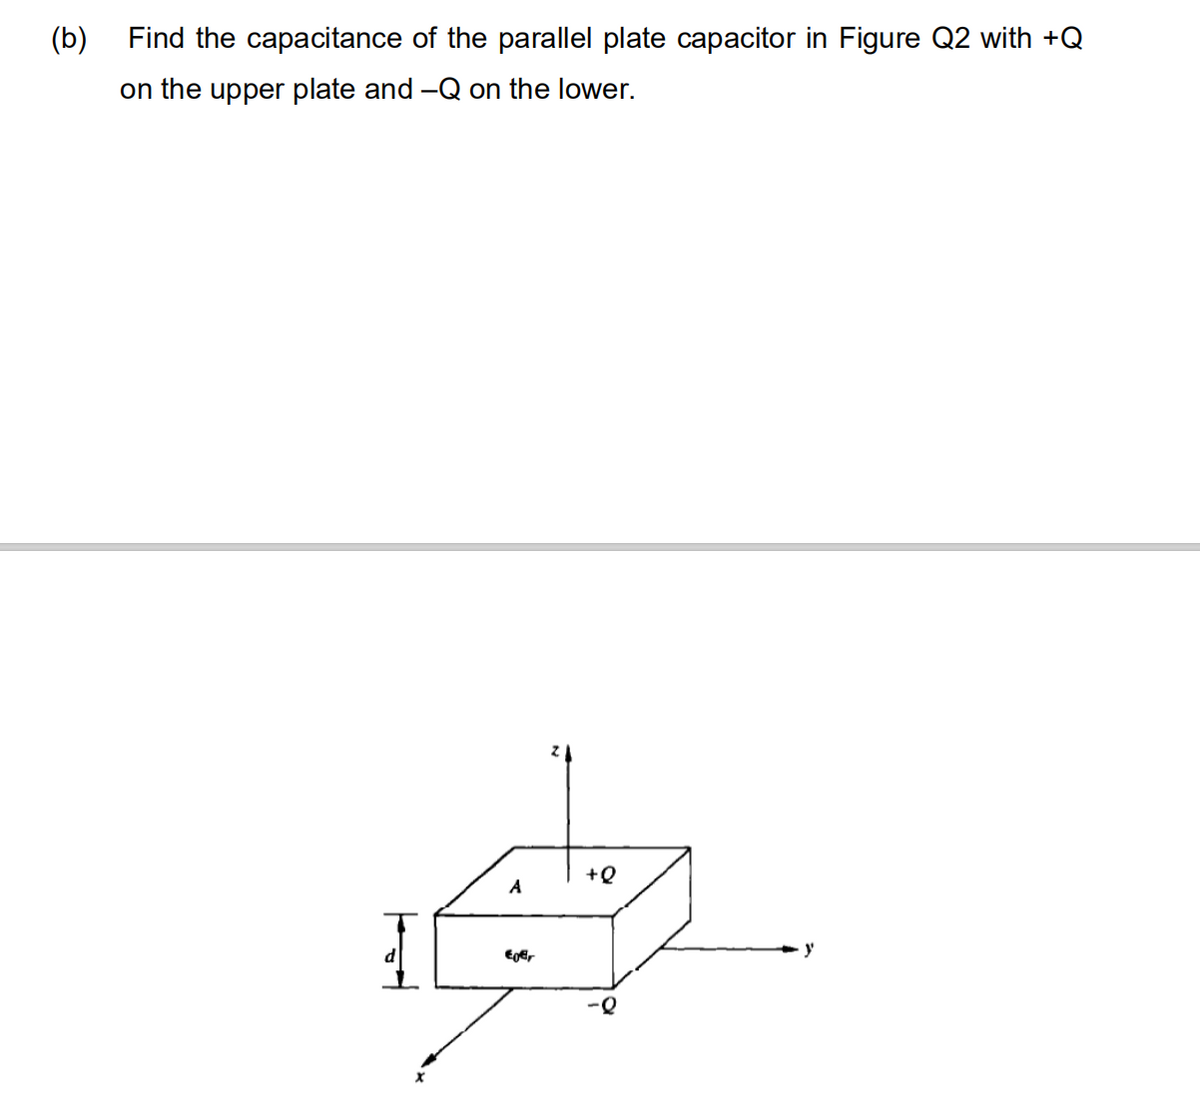 (b)
Find the capacitance of the parallel plate capacitor in Figure Q2 with +Q
on the upper plate and -Q on the lower.
+Q
y
